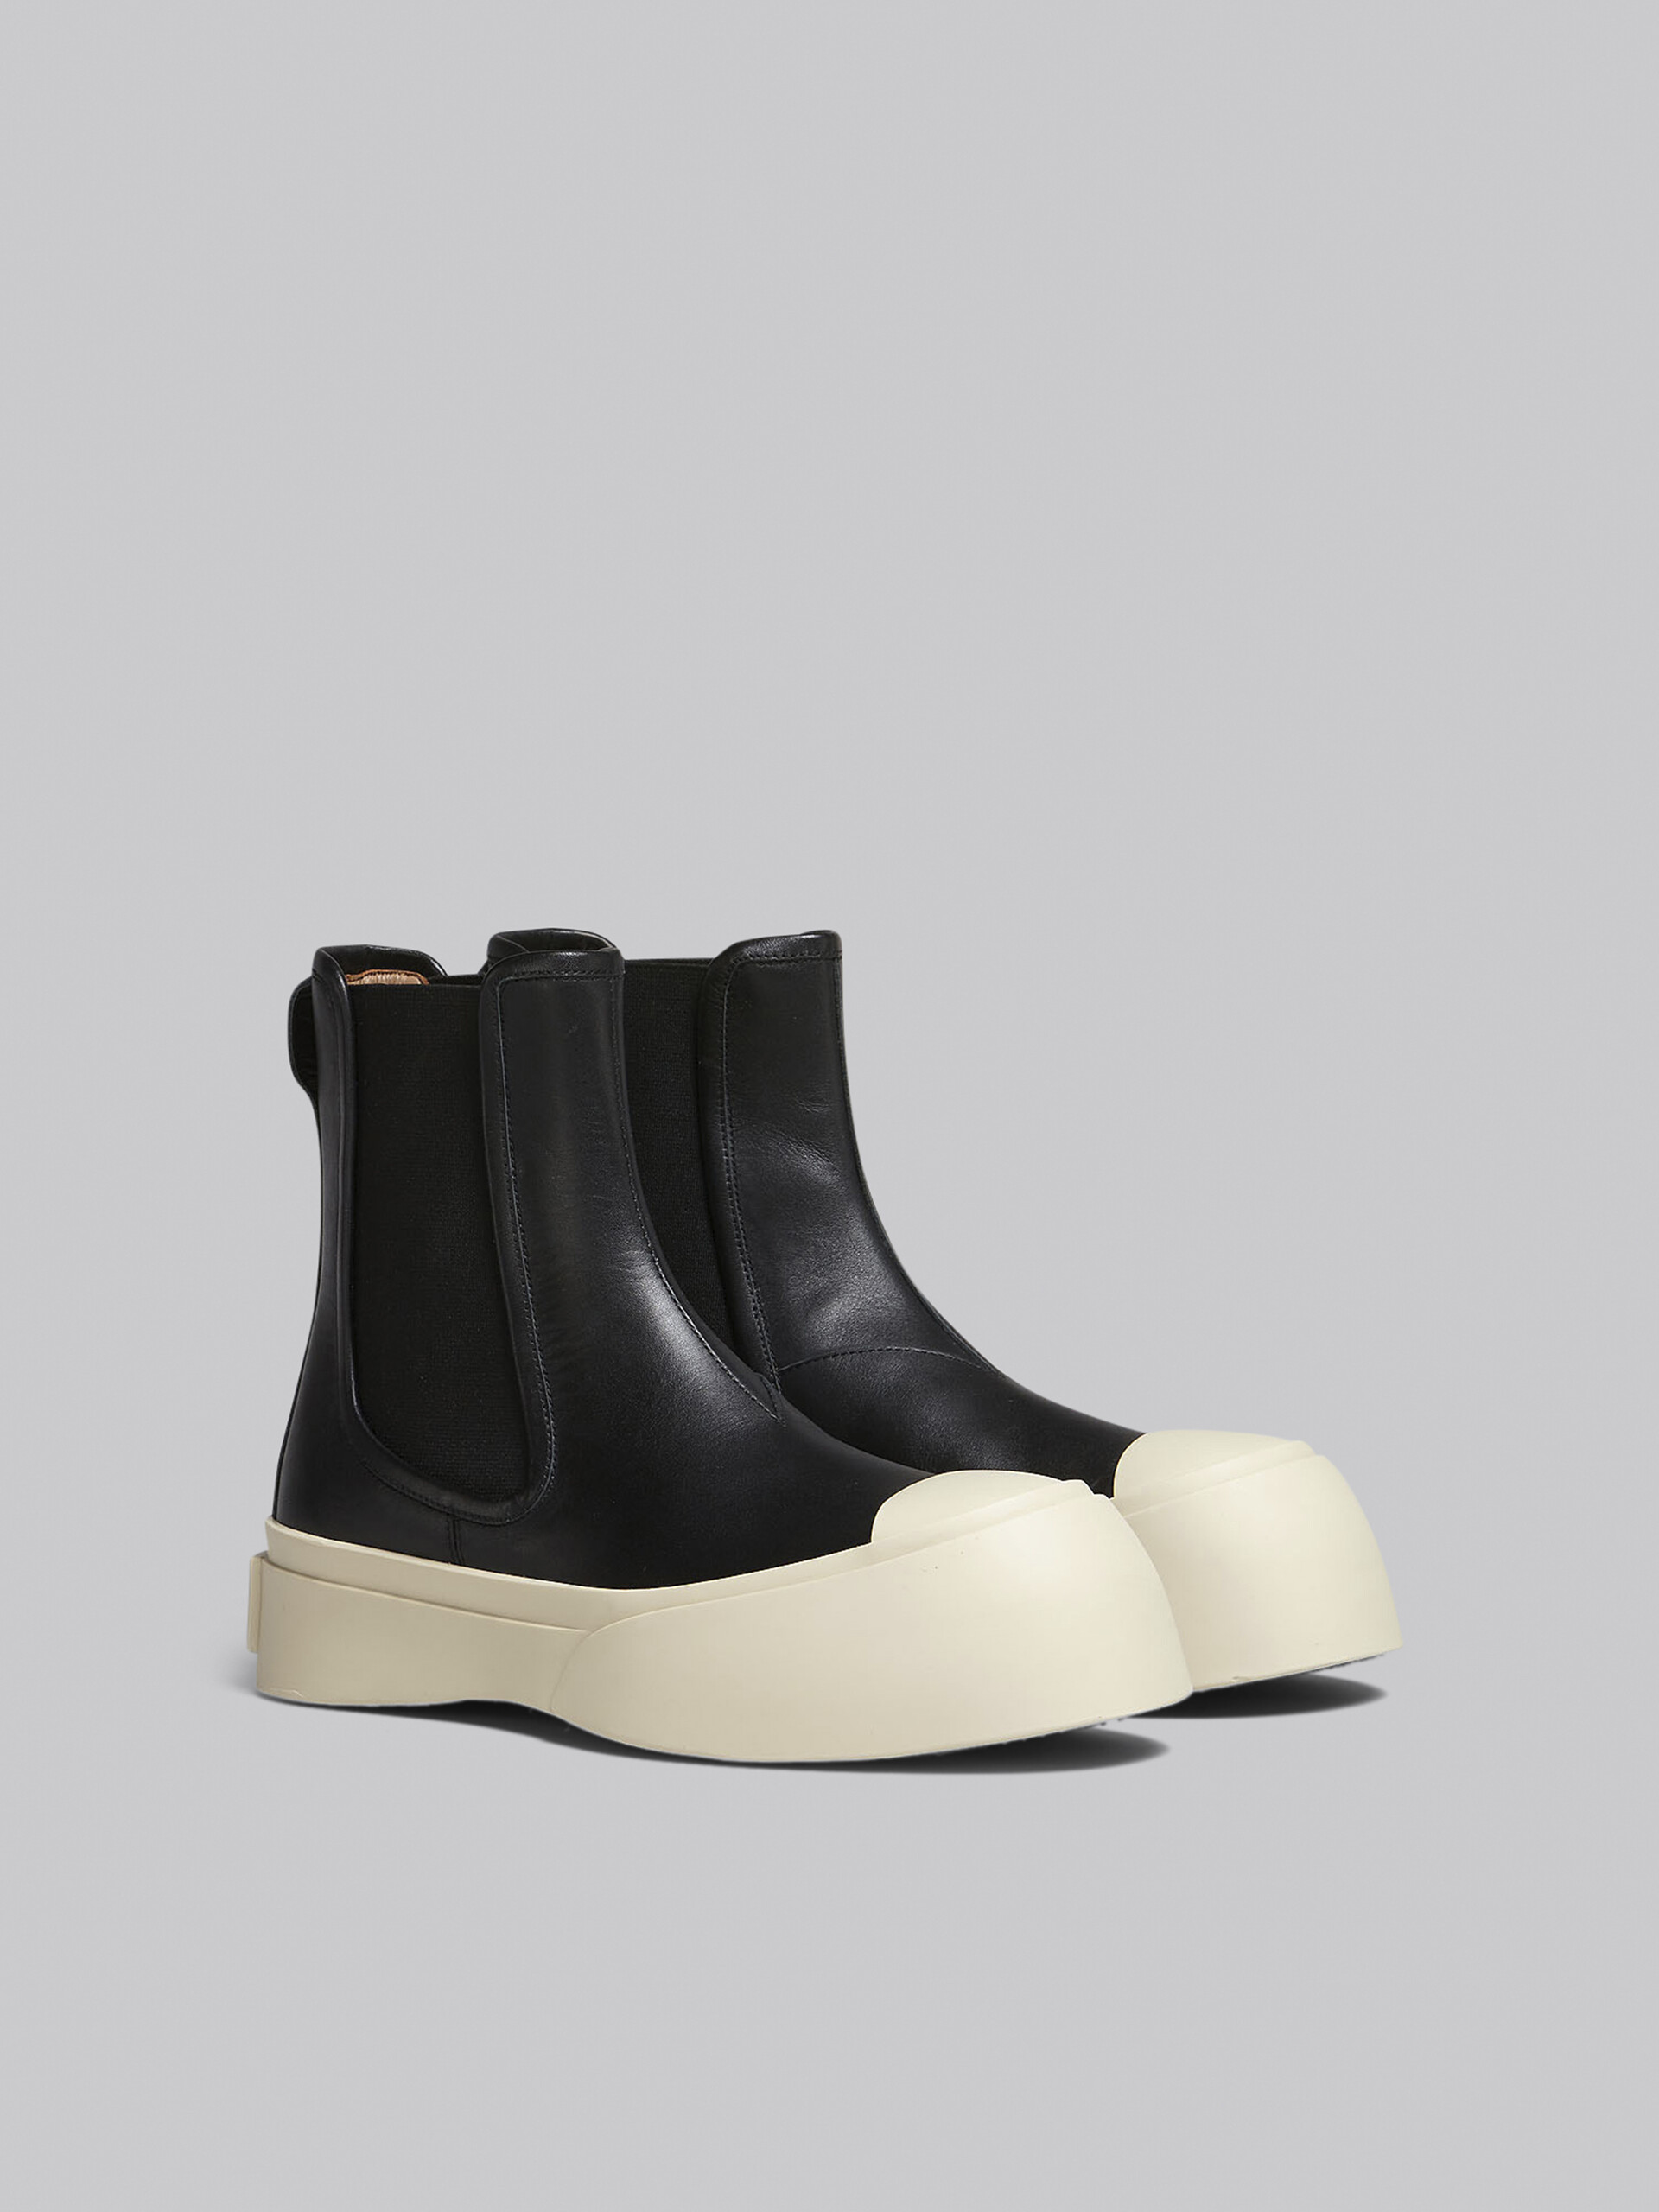 Black nappa leather PABLO Chelsea boot - Boots - Image 2